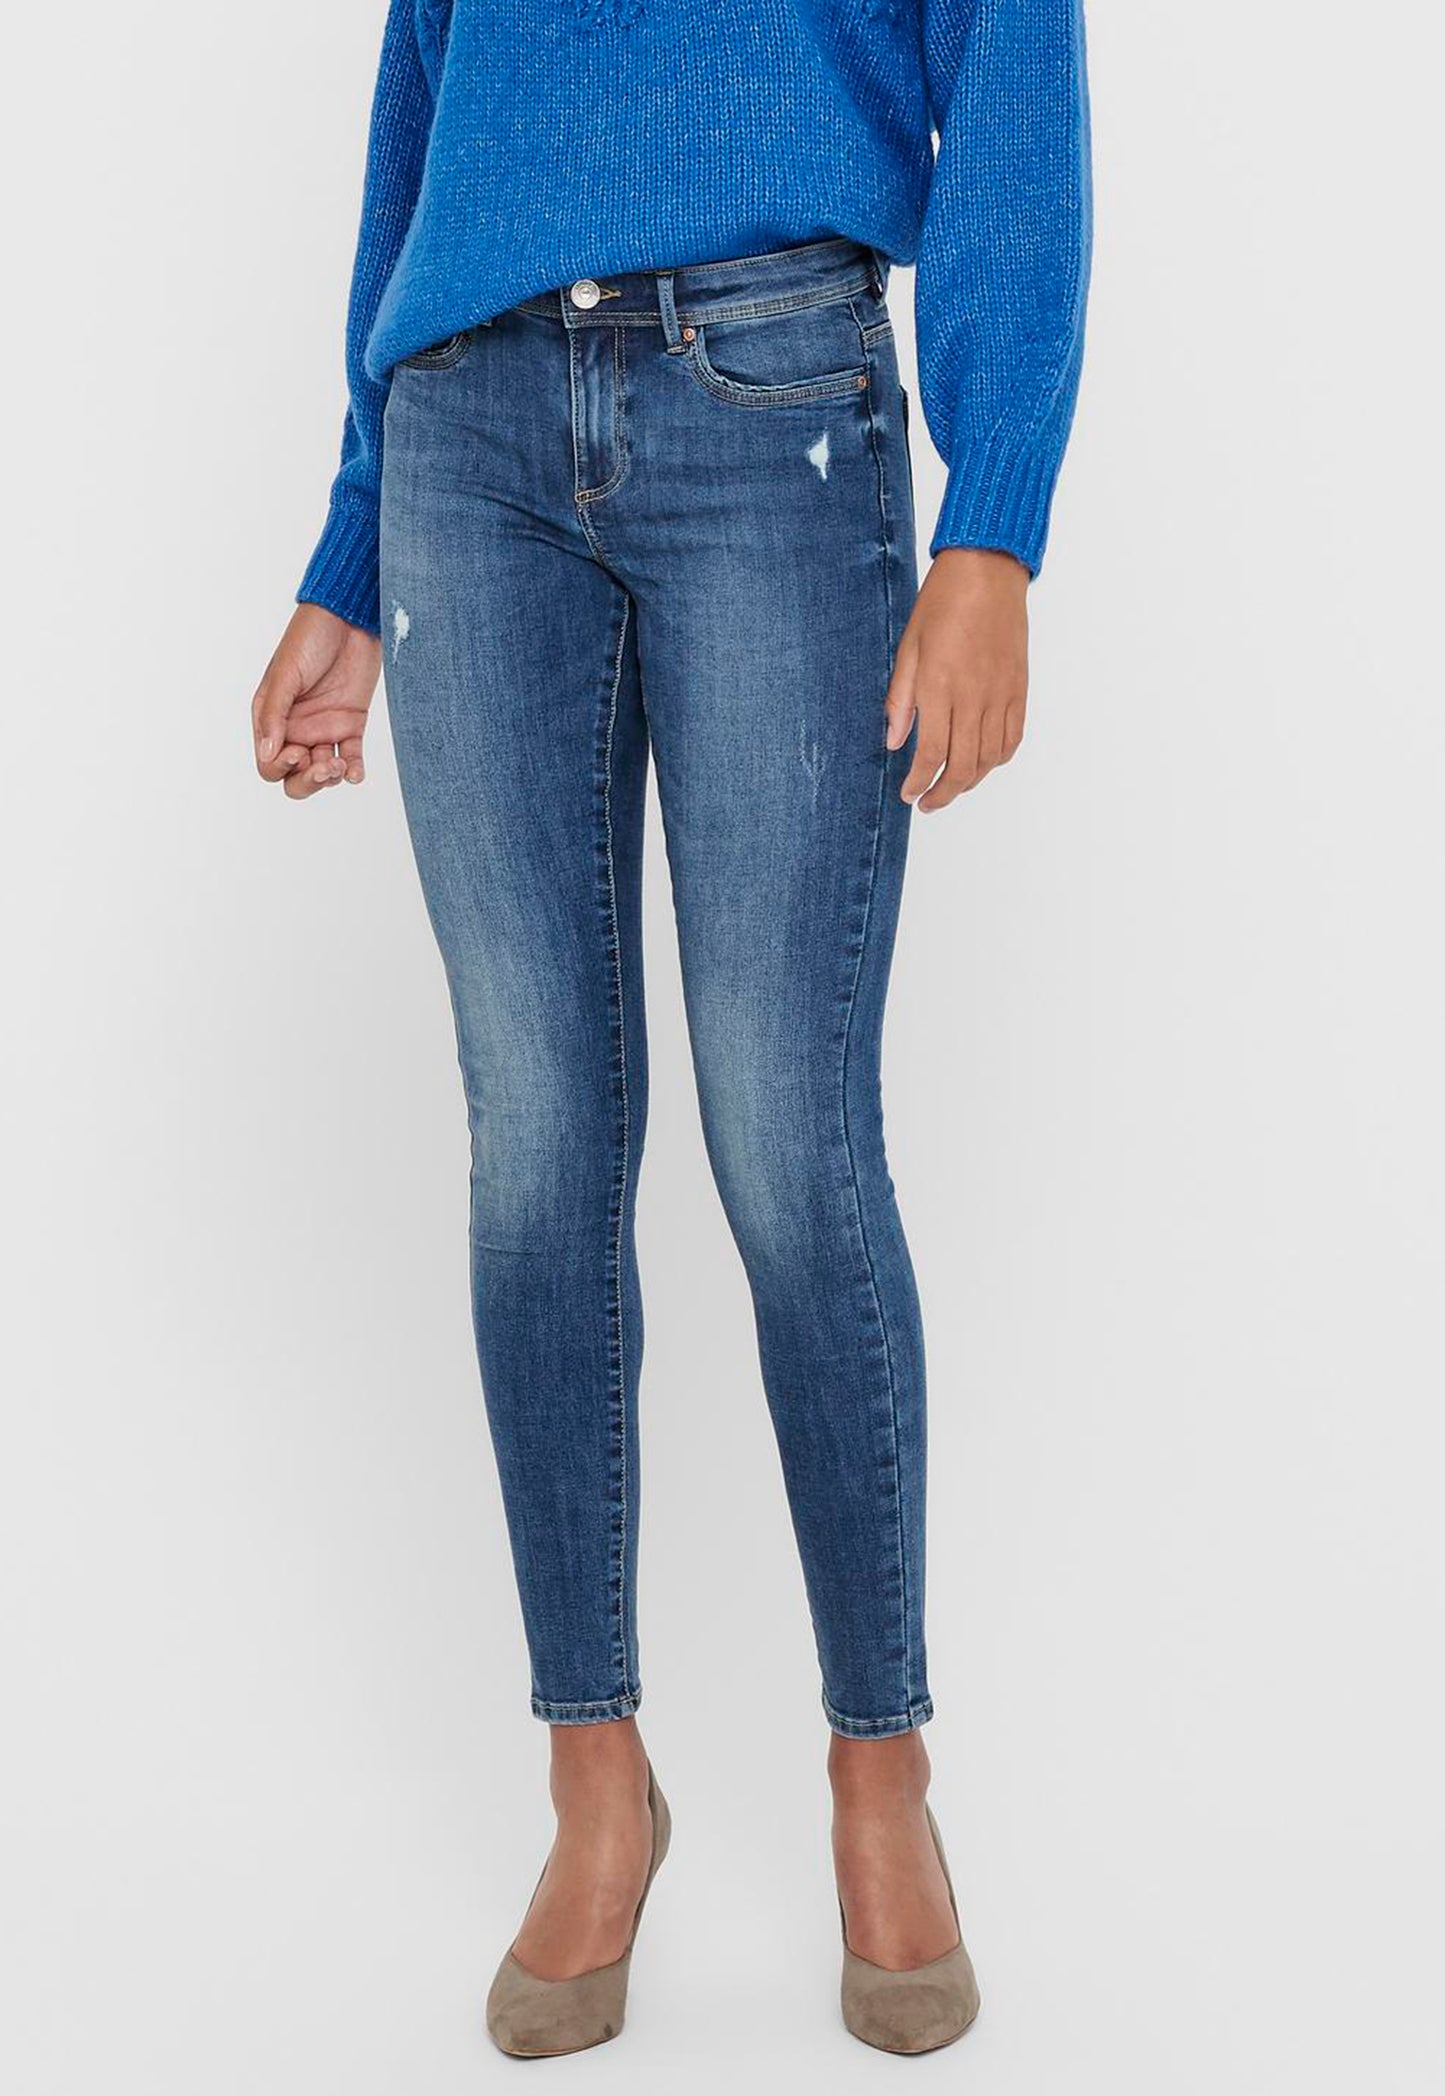 ONLY Wauw Mid Rise Skinny Jeans with Small Rip in Mid Blue - One Nation Clothing